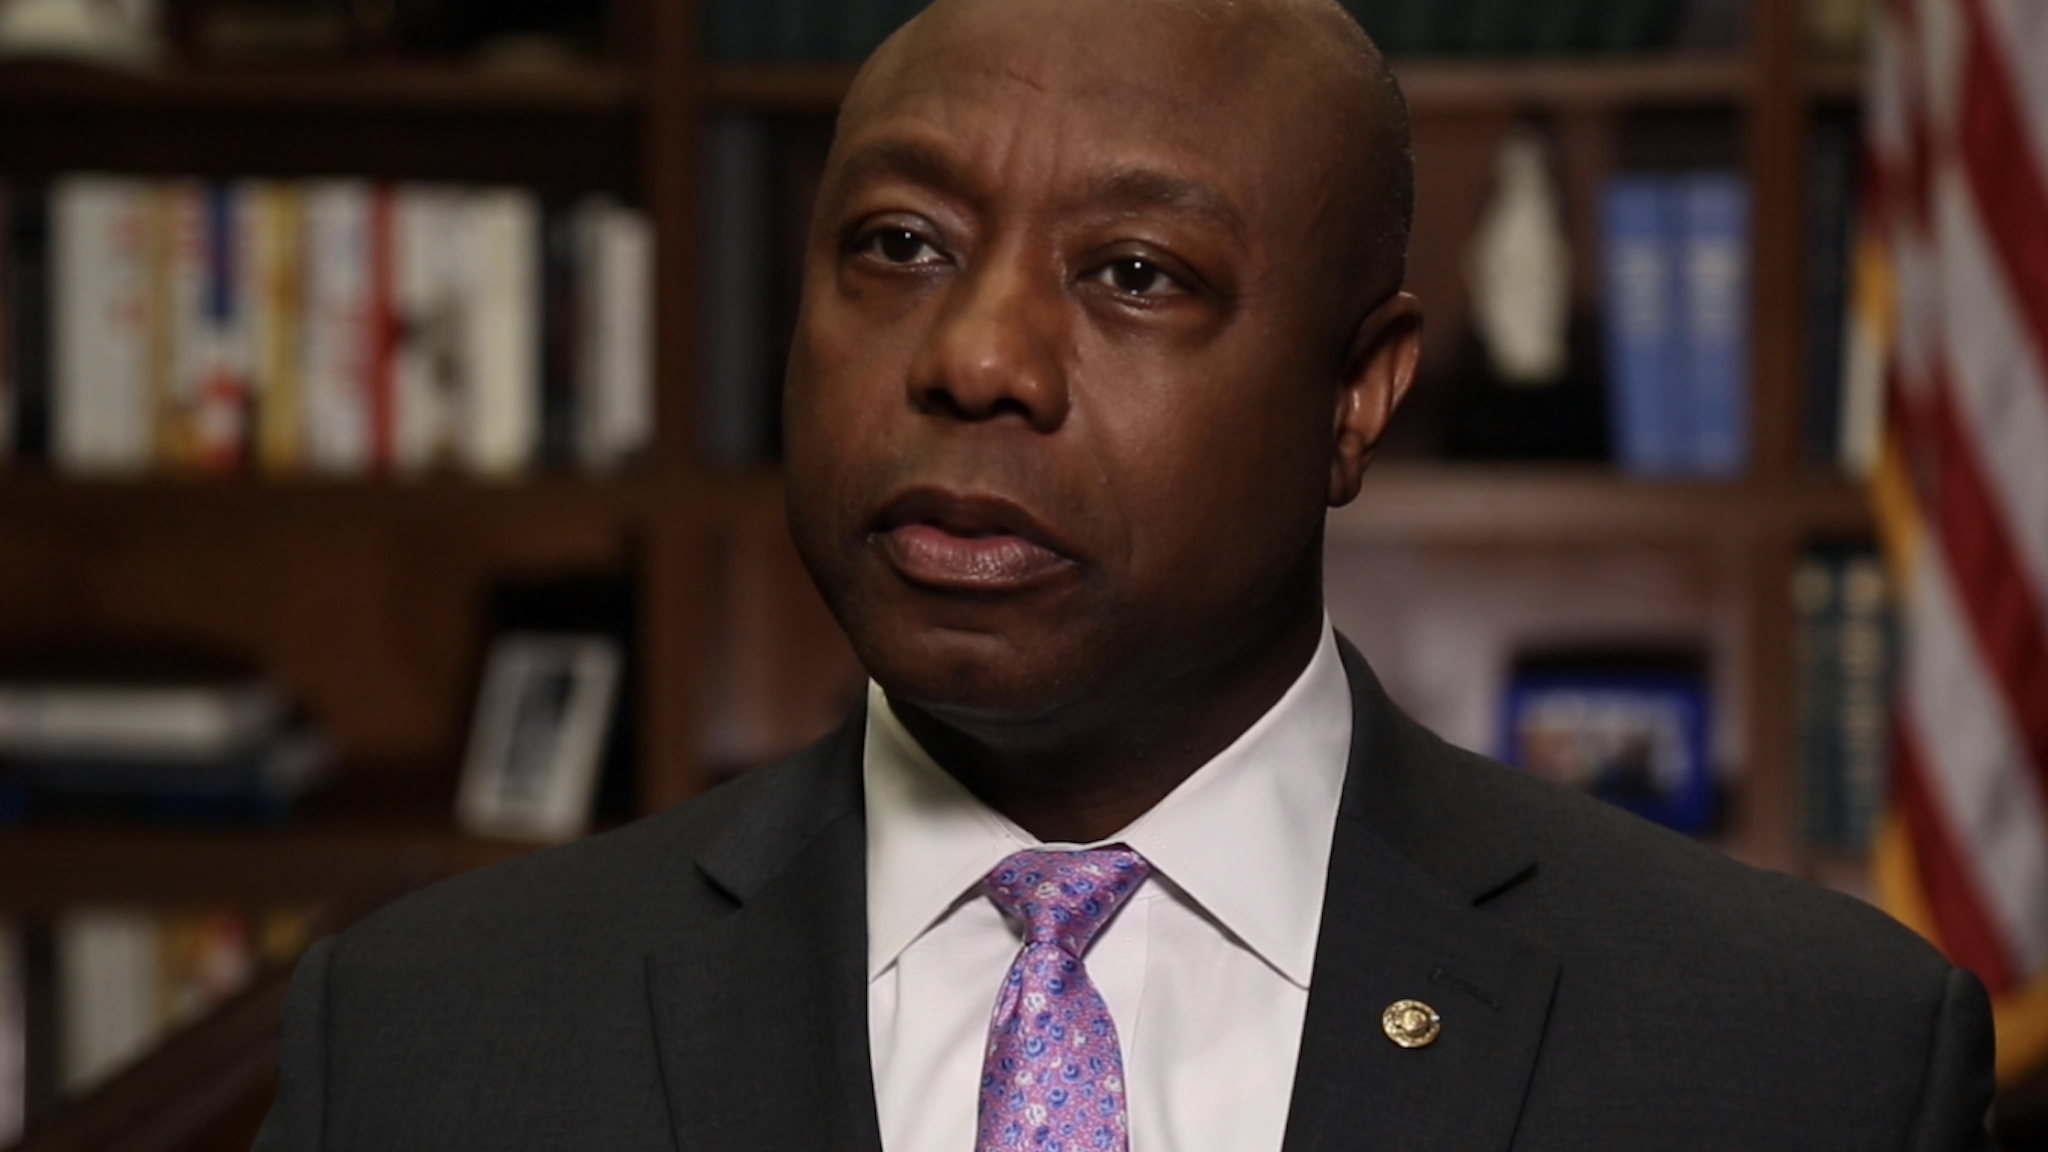 Sen. Tim Scott told The Daily Wire that America is not a racist country, and called for healing after the Buffalo massacre